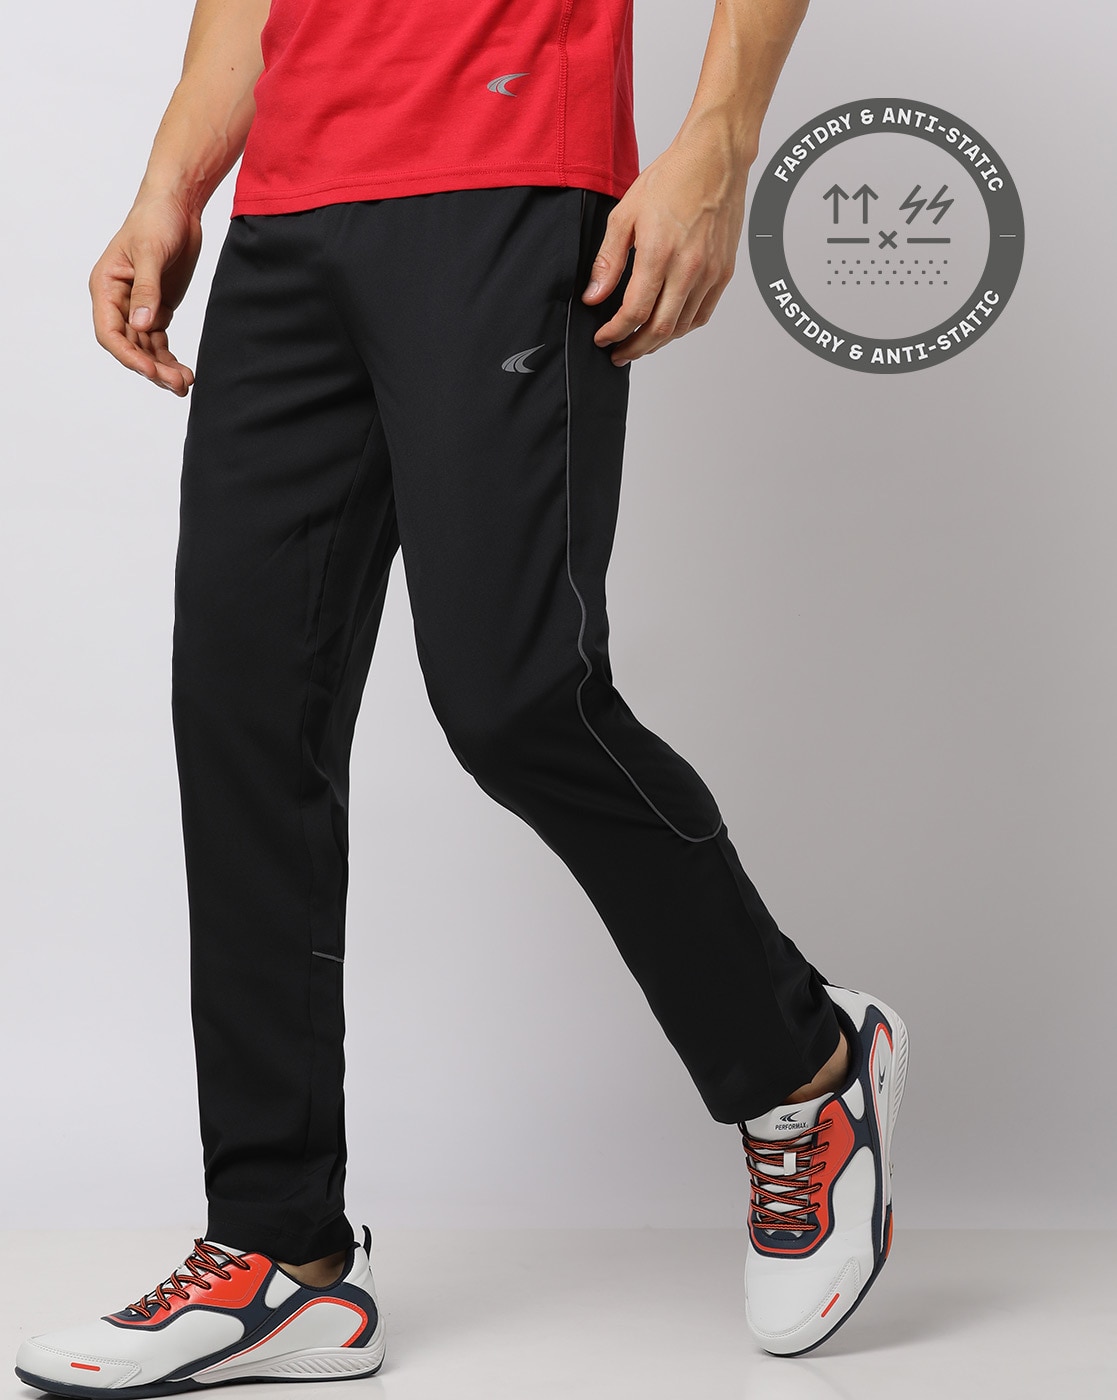 Share more than 198 performax track pants super hot